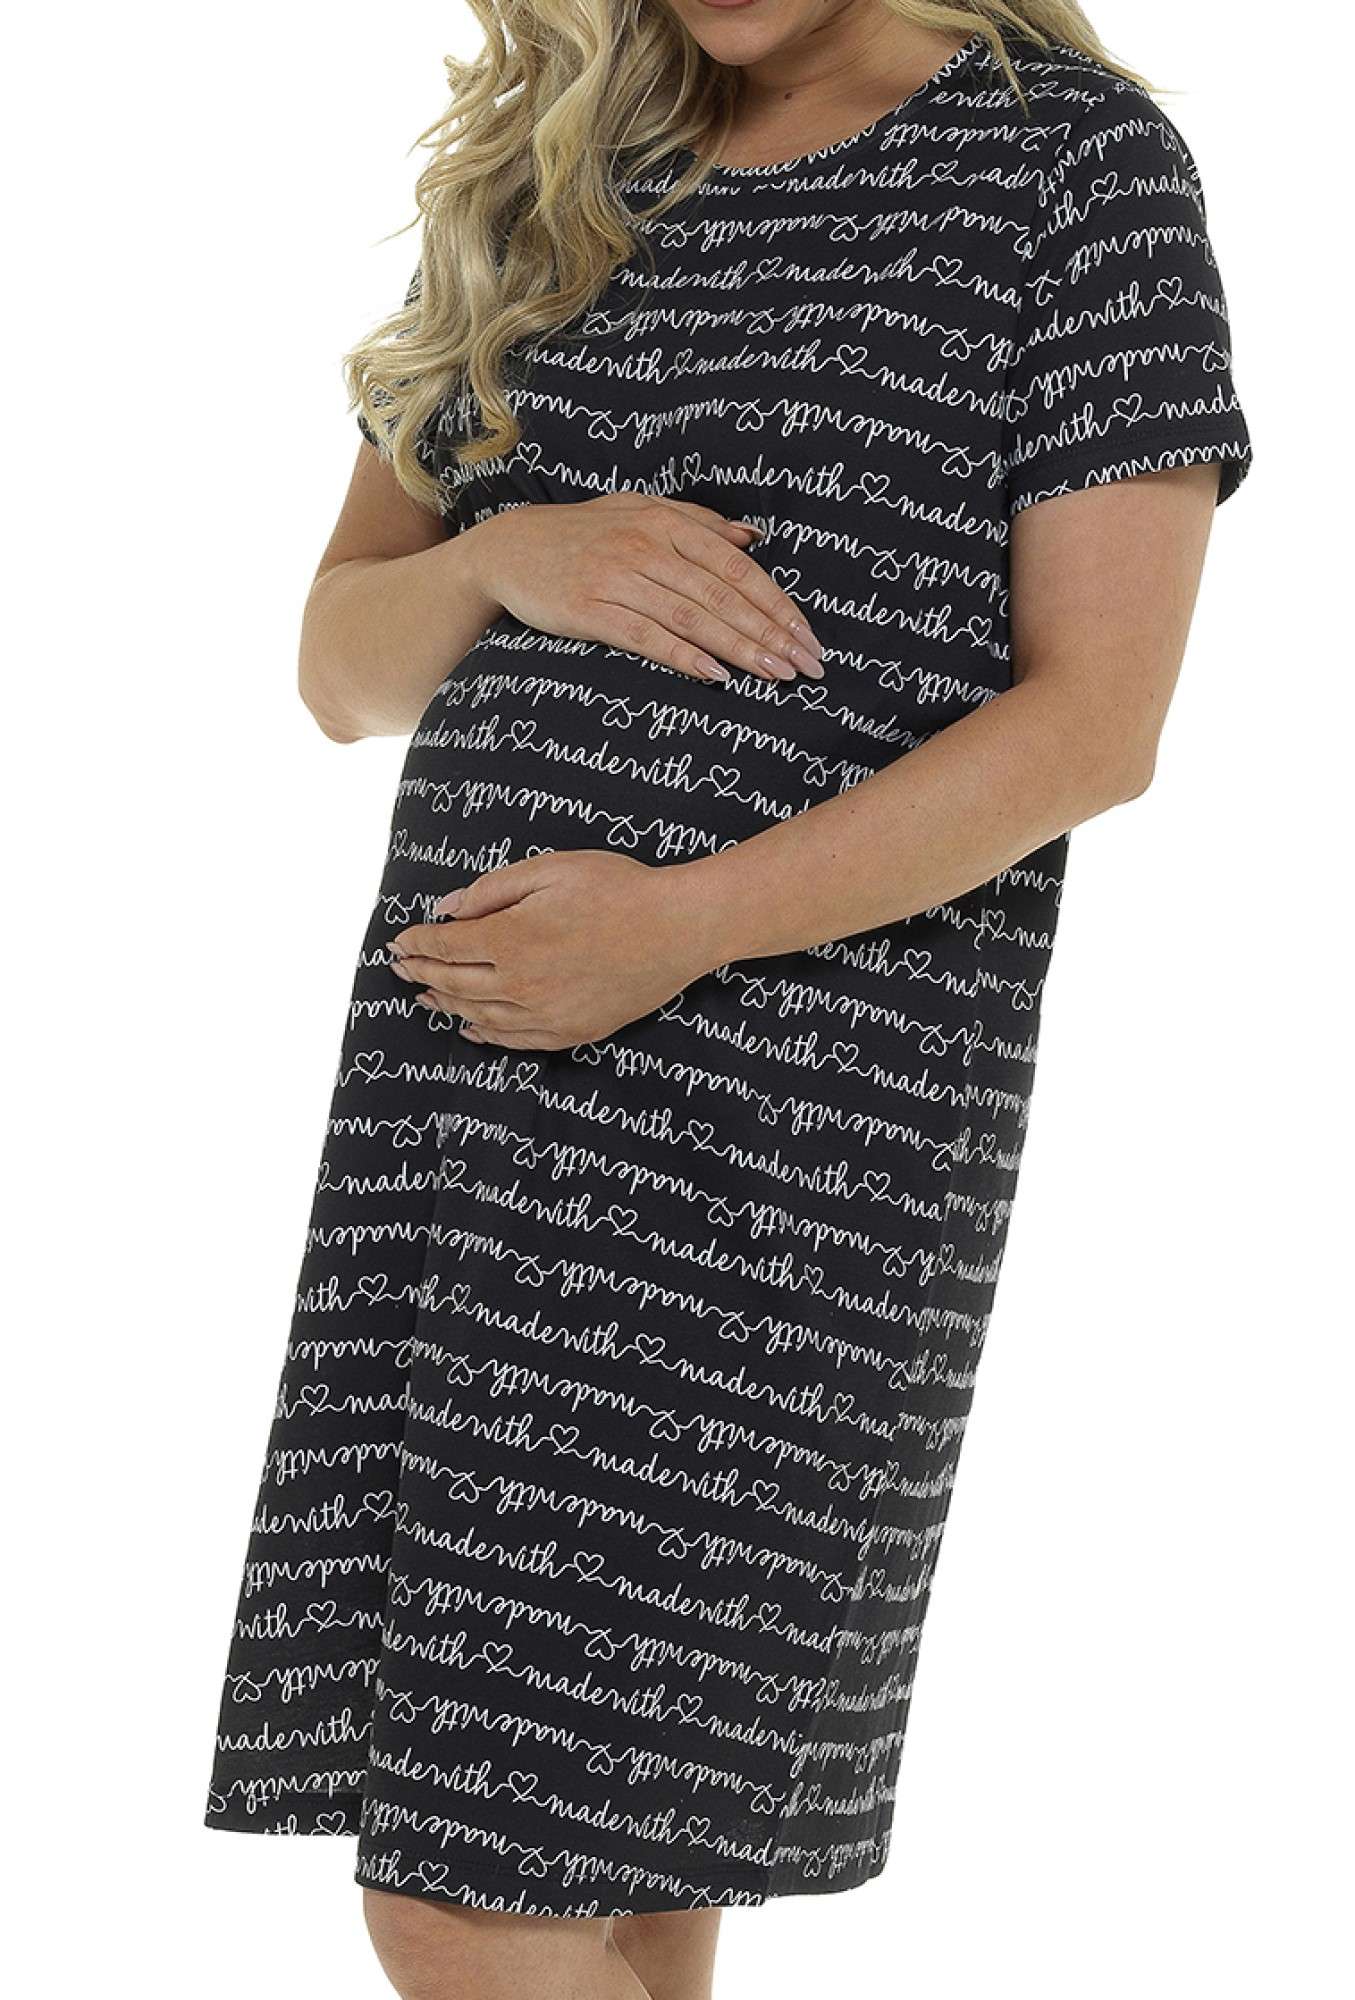 Ladies Maternity "Made with Love" Soft Cotton Short Sleeve Nightshirt Nightdress